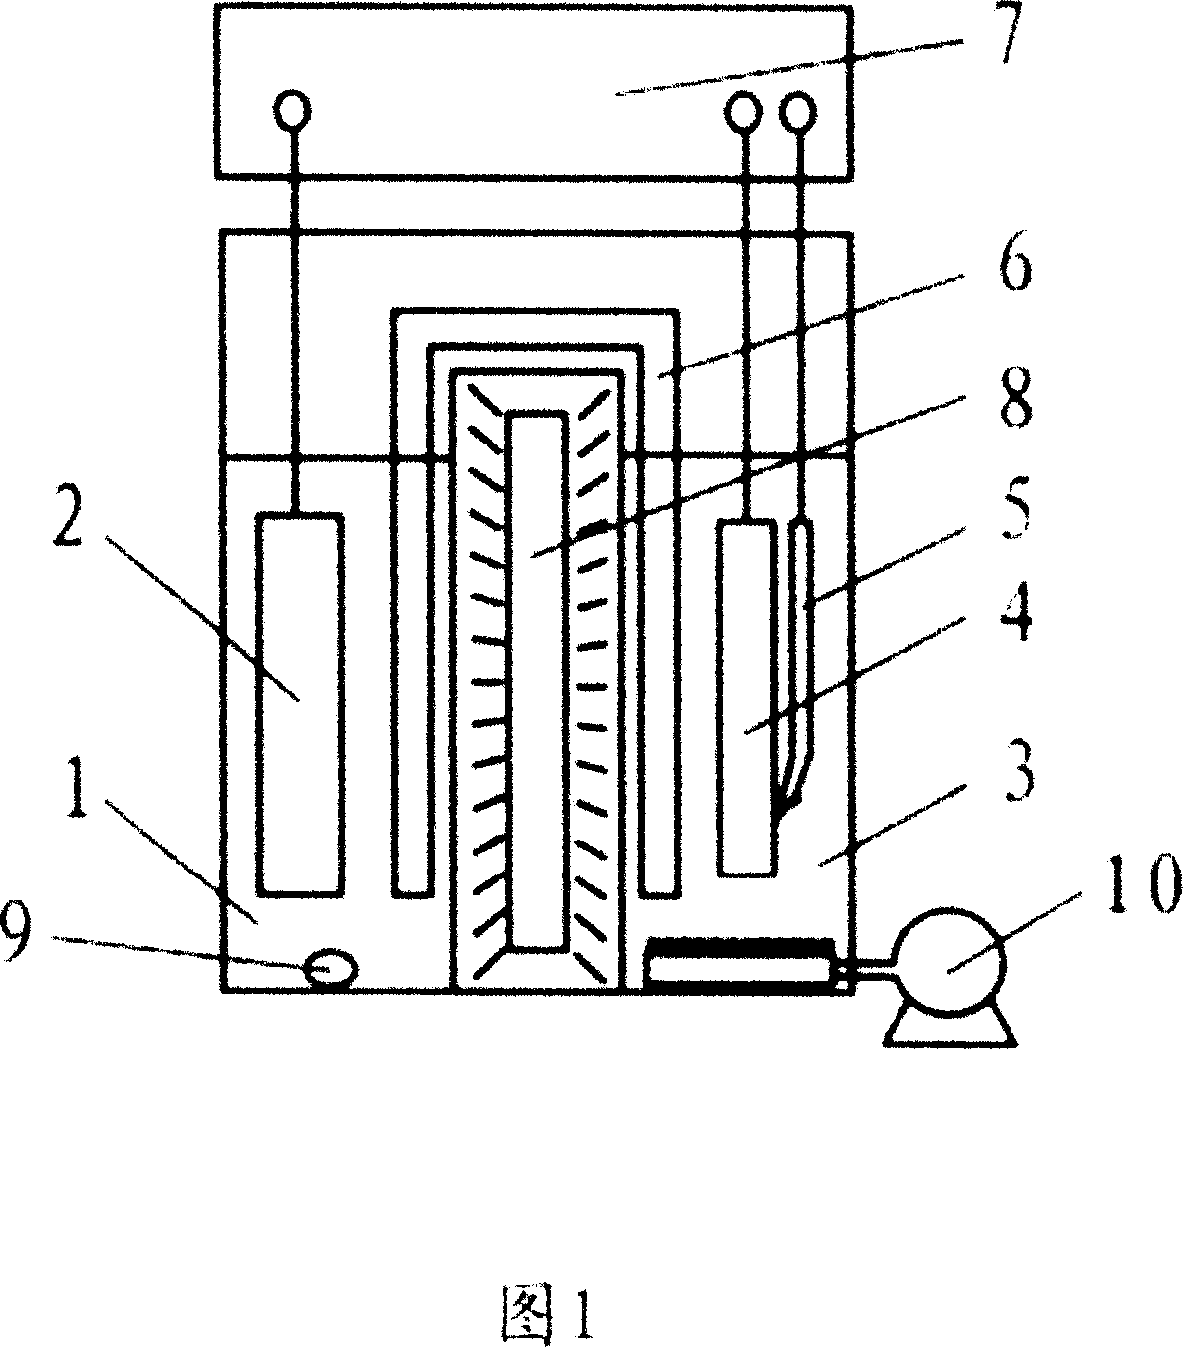 Photoelectrical chemical synergistic catalytic reaction waste water treatment method and device